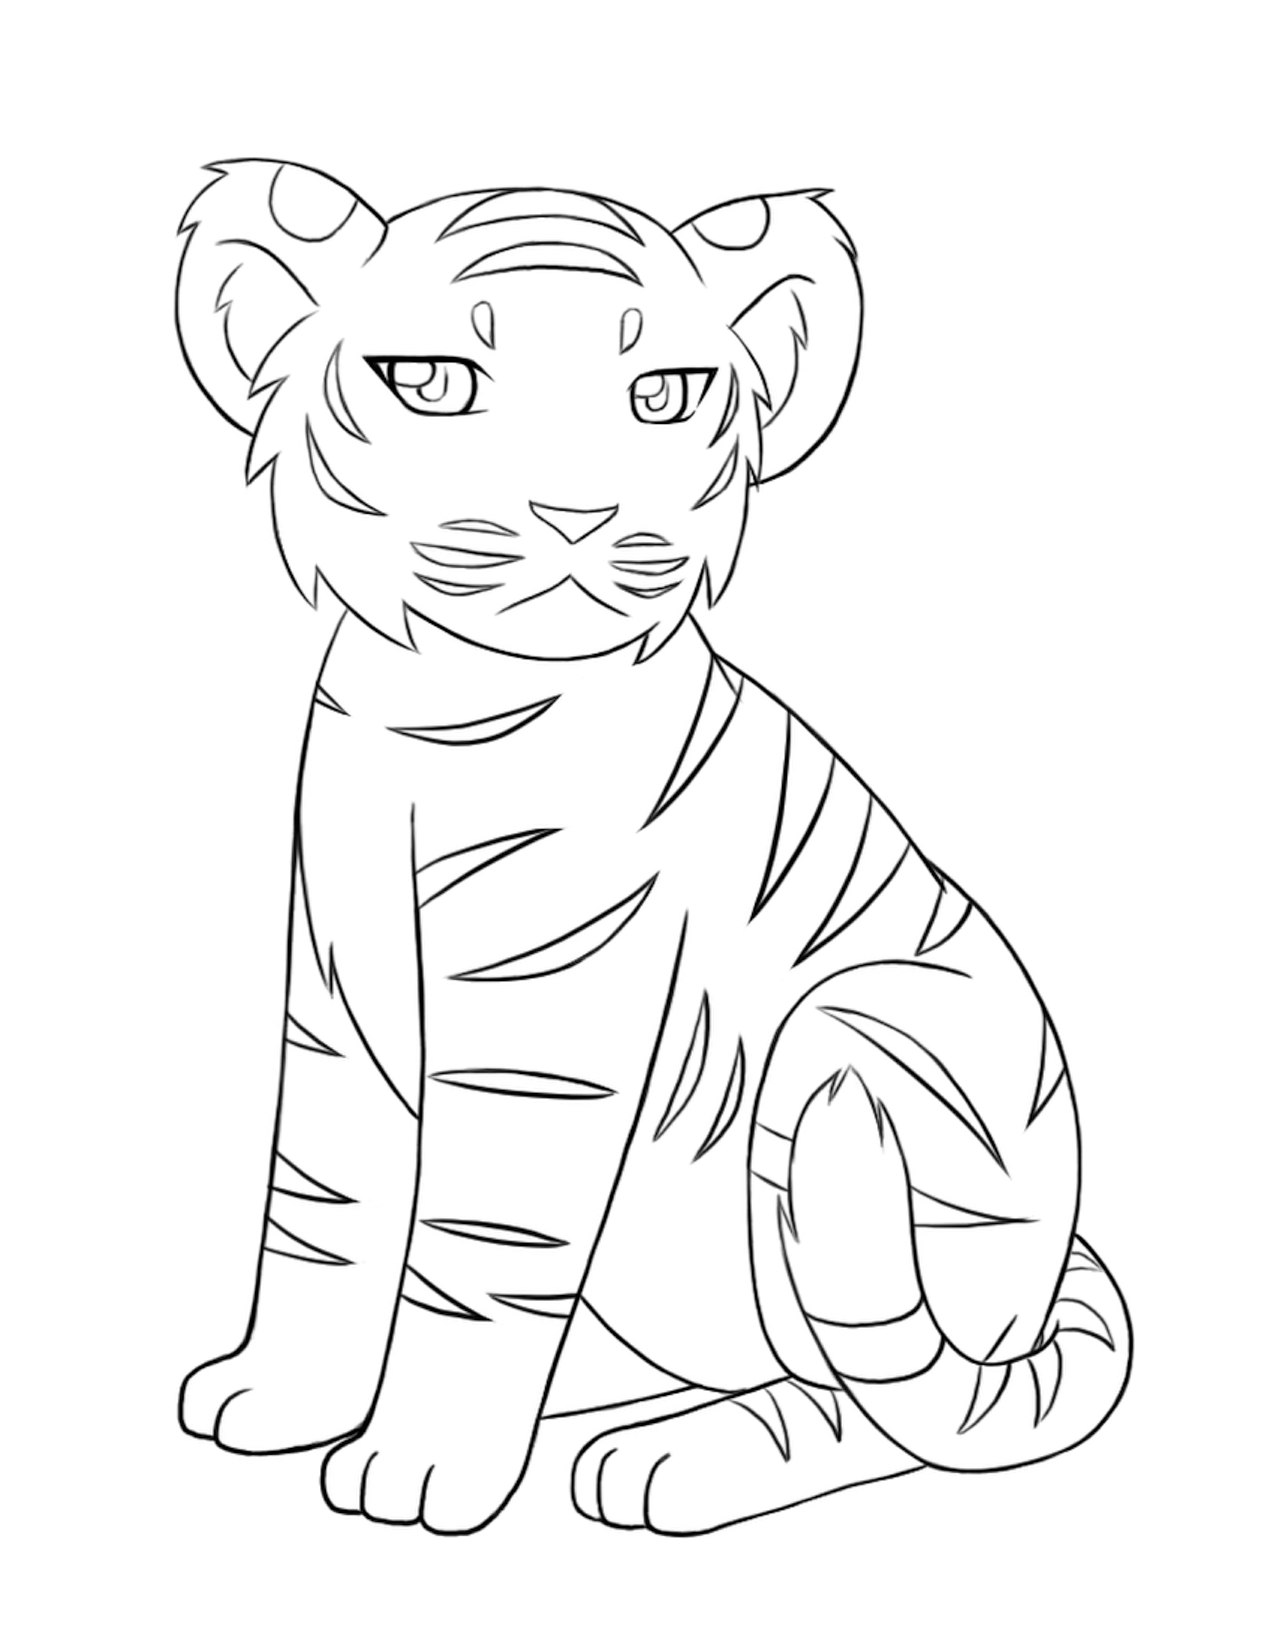 tiger coloring page tiger line drawing at getdrawingscom free for personal page coloring tiger 